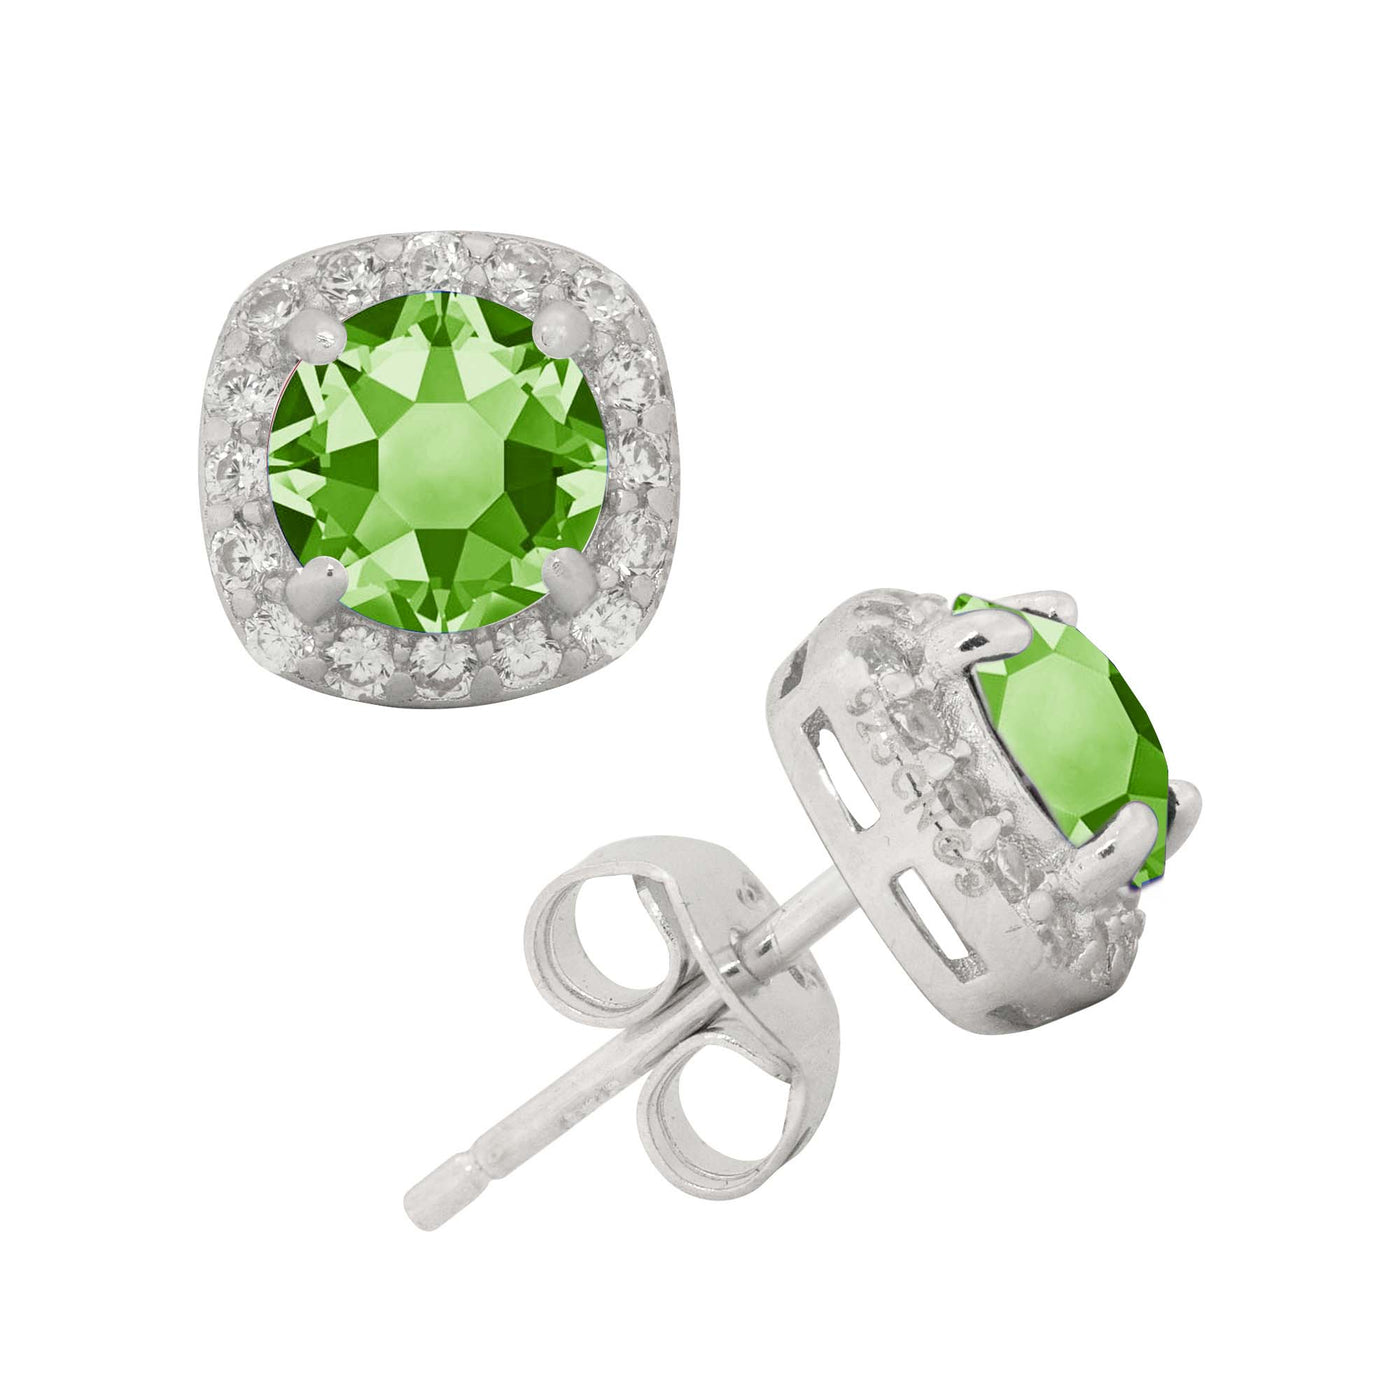 Rebecca Sloane Silver Pave Halo with Peridot Crystal Stud Earring